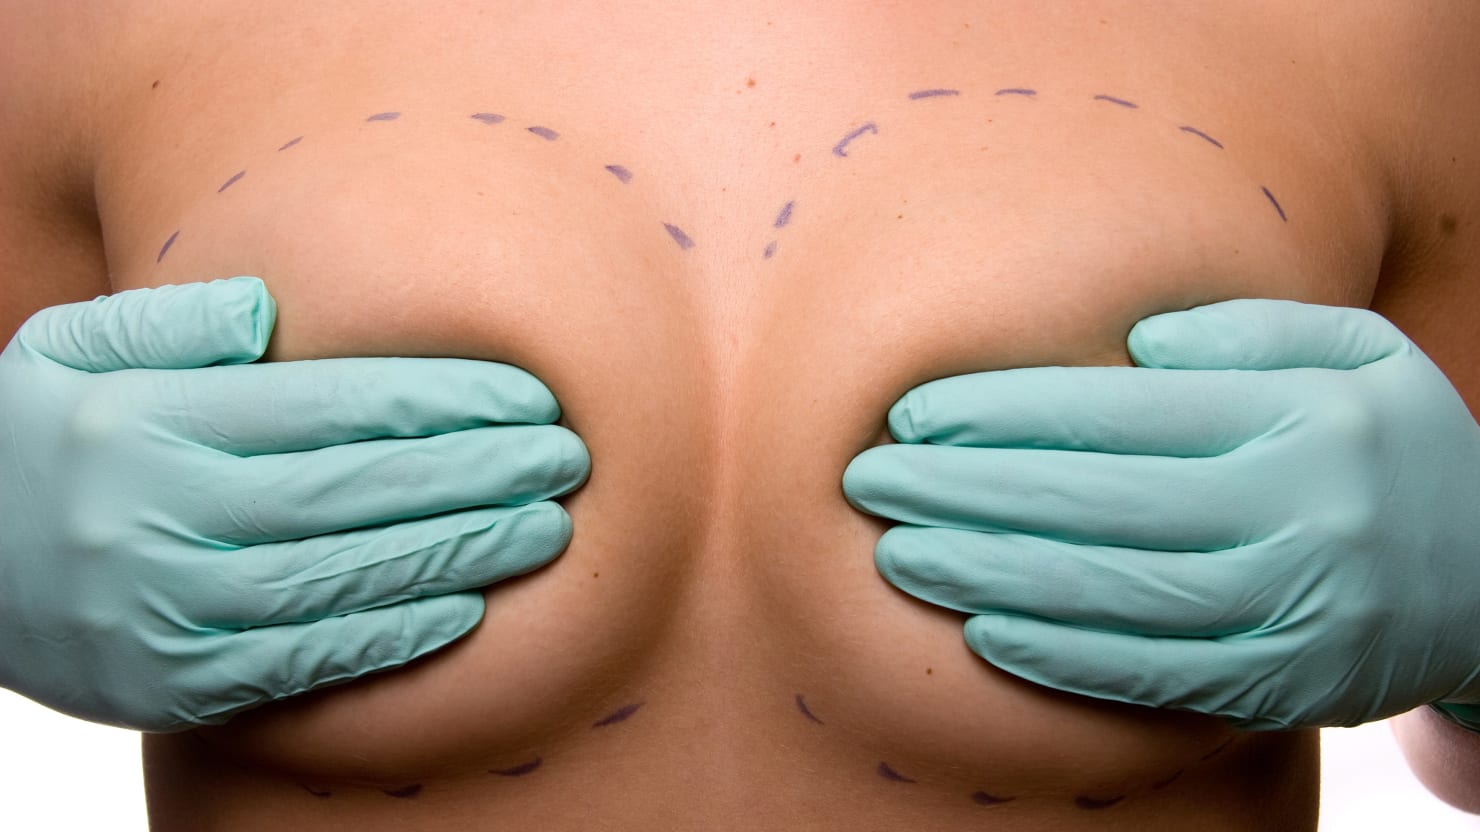 Breast Augmentation Revision Surgery